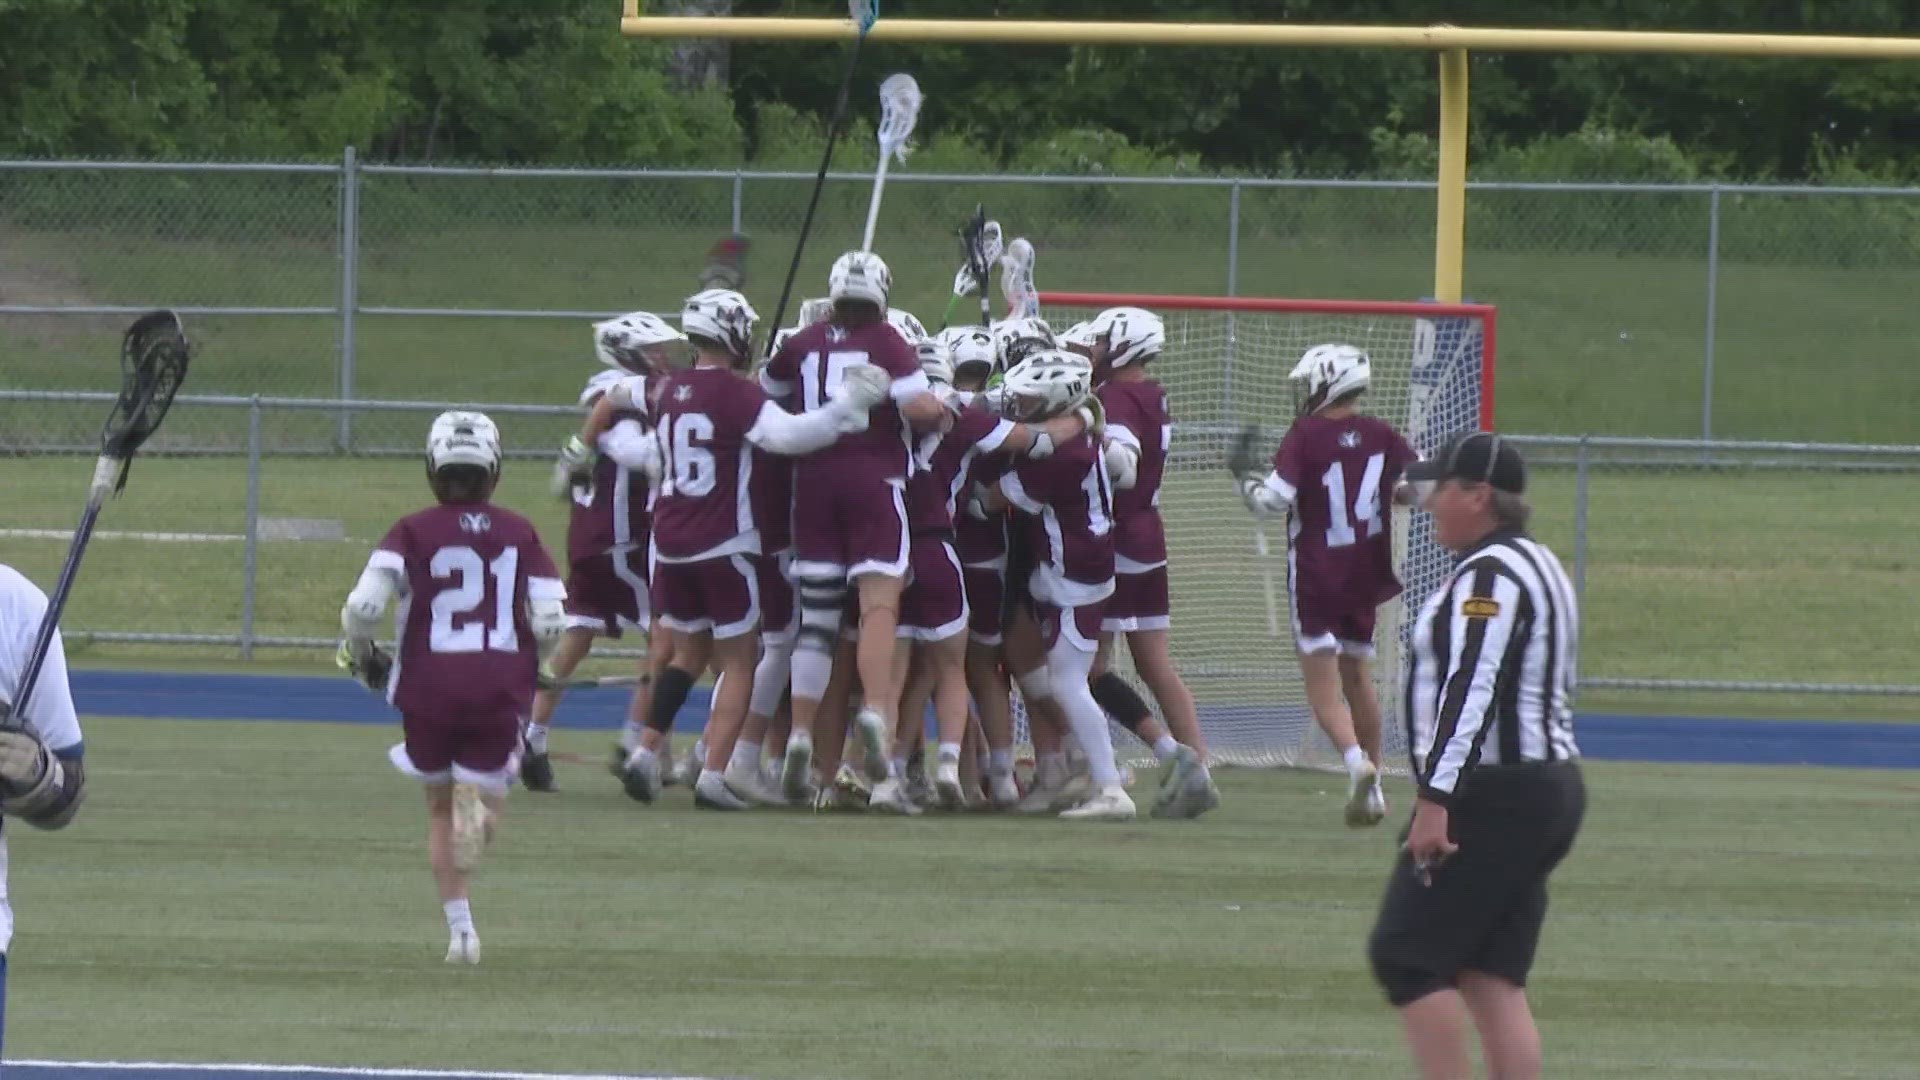 The decision comes after varsity boys lacrosse team members said they were kicked off the team due to protesting "harassment and verbal abuse" from their coach.